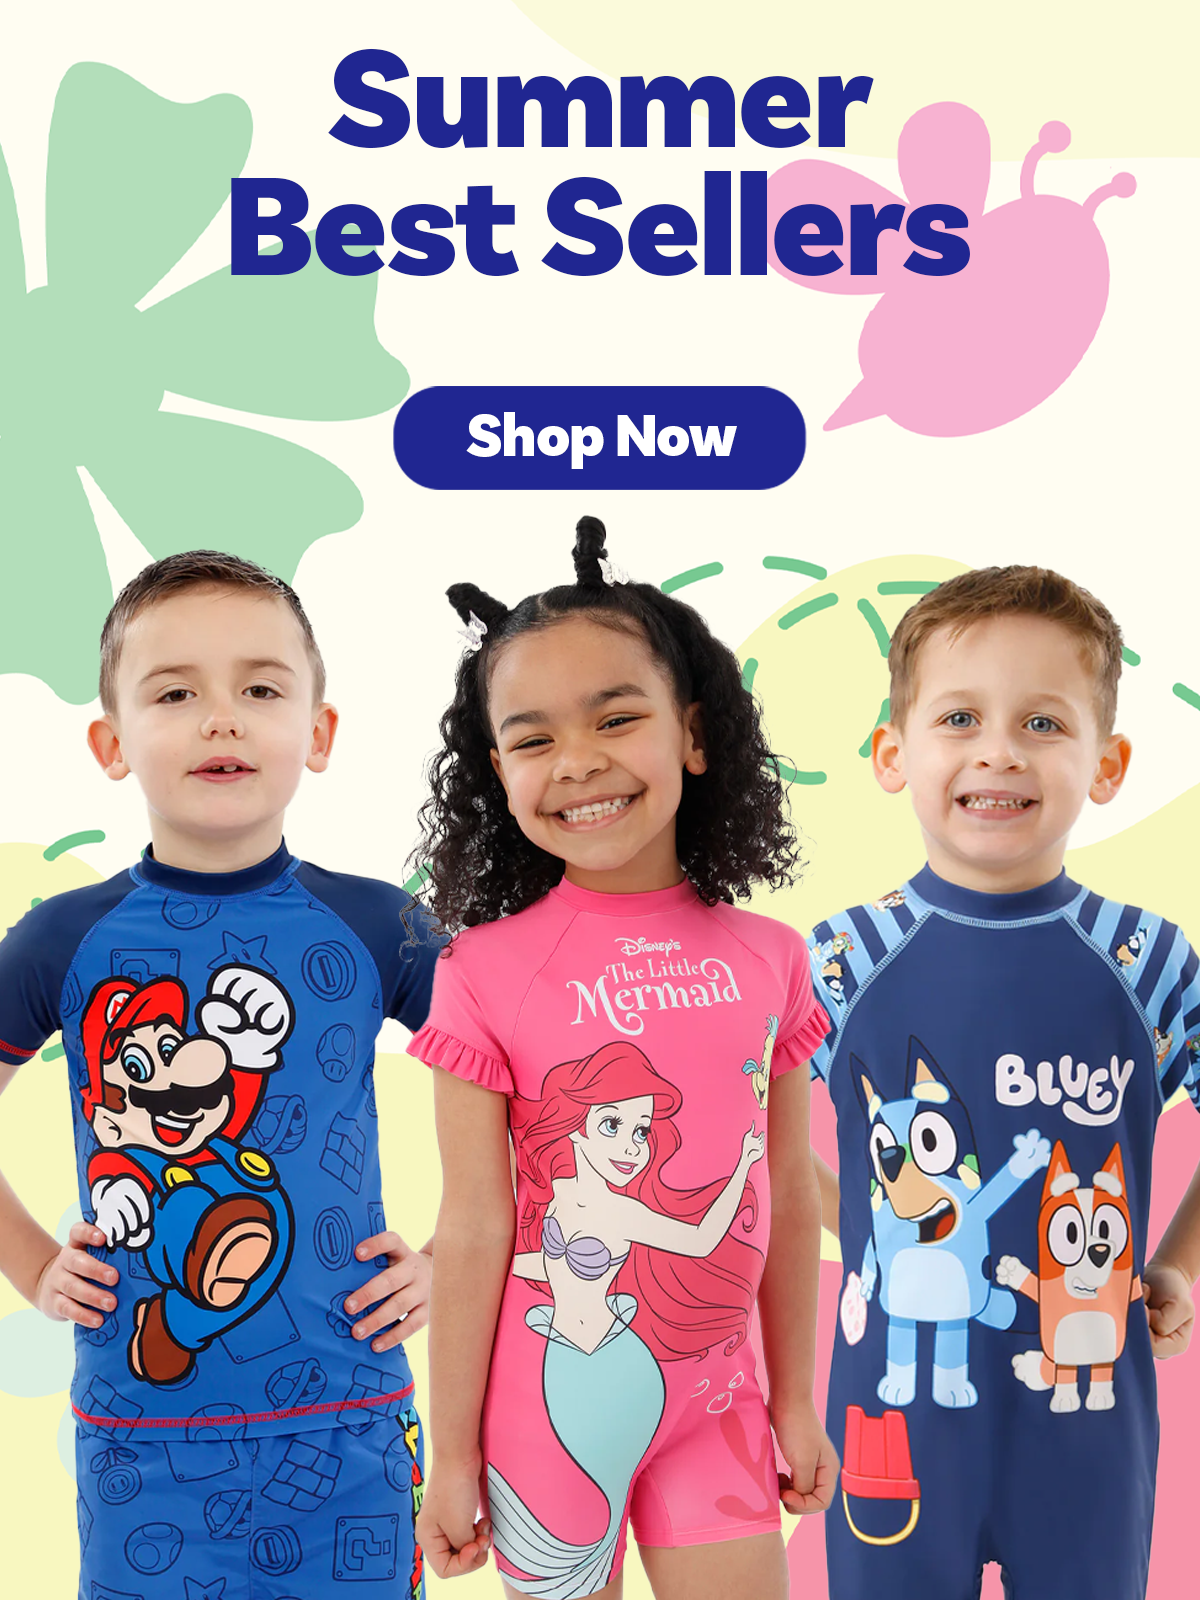 Summer Best Sellers - Shop Now. 2 young boys and a young girl wearing Swim Sets. 1 Boys Bluey Surfsuit, 1 Boys Super Mario Swim Set and 1 Girls Disneys The Little Mermaid Surfsuit.